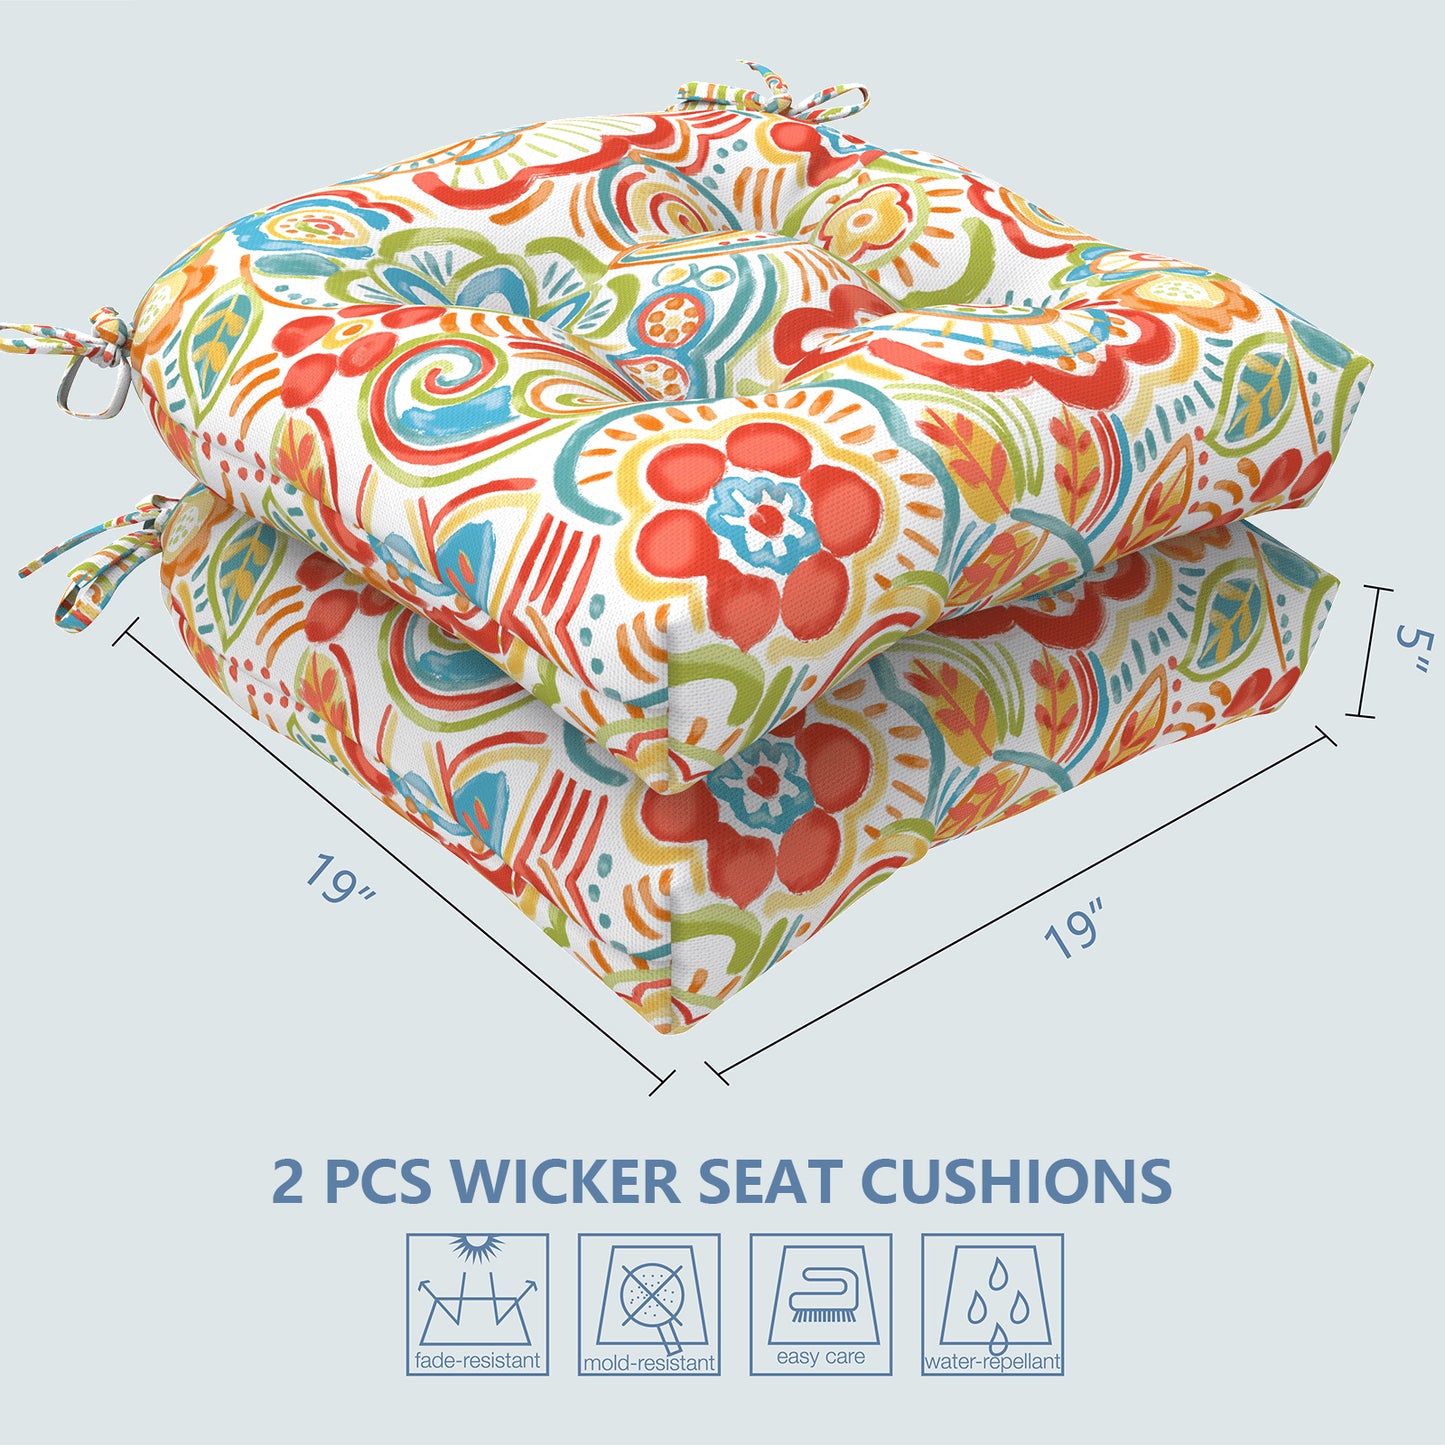 Melody Elephant Patio Wicker Chair Cushions, All Weather Outdoor Tufted Chair Pads Pack of 2, 19 x 19 x 5 Inch U-Shaped Seat Cushions of Garden Furniture Decoration, Flower Multi